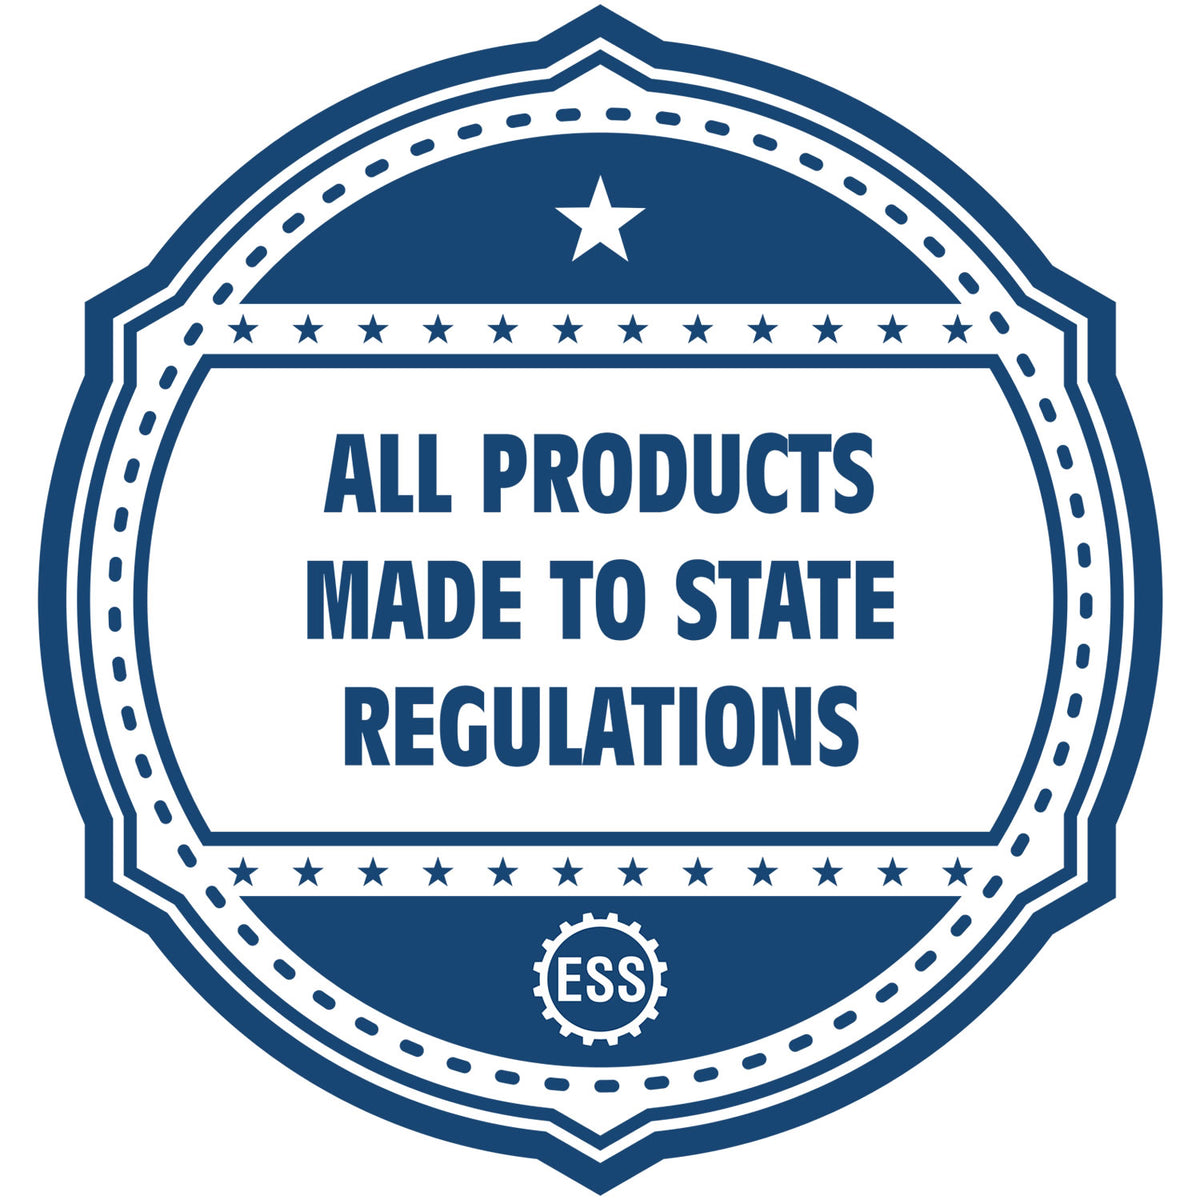 An icon or badge element for the Wooden Handle California State Seal Notary Public Stamp showing that this product is made in compliance with state regulations.